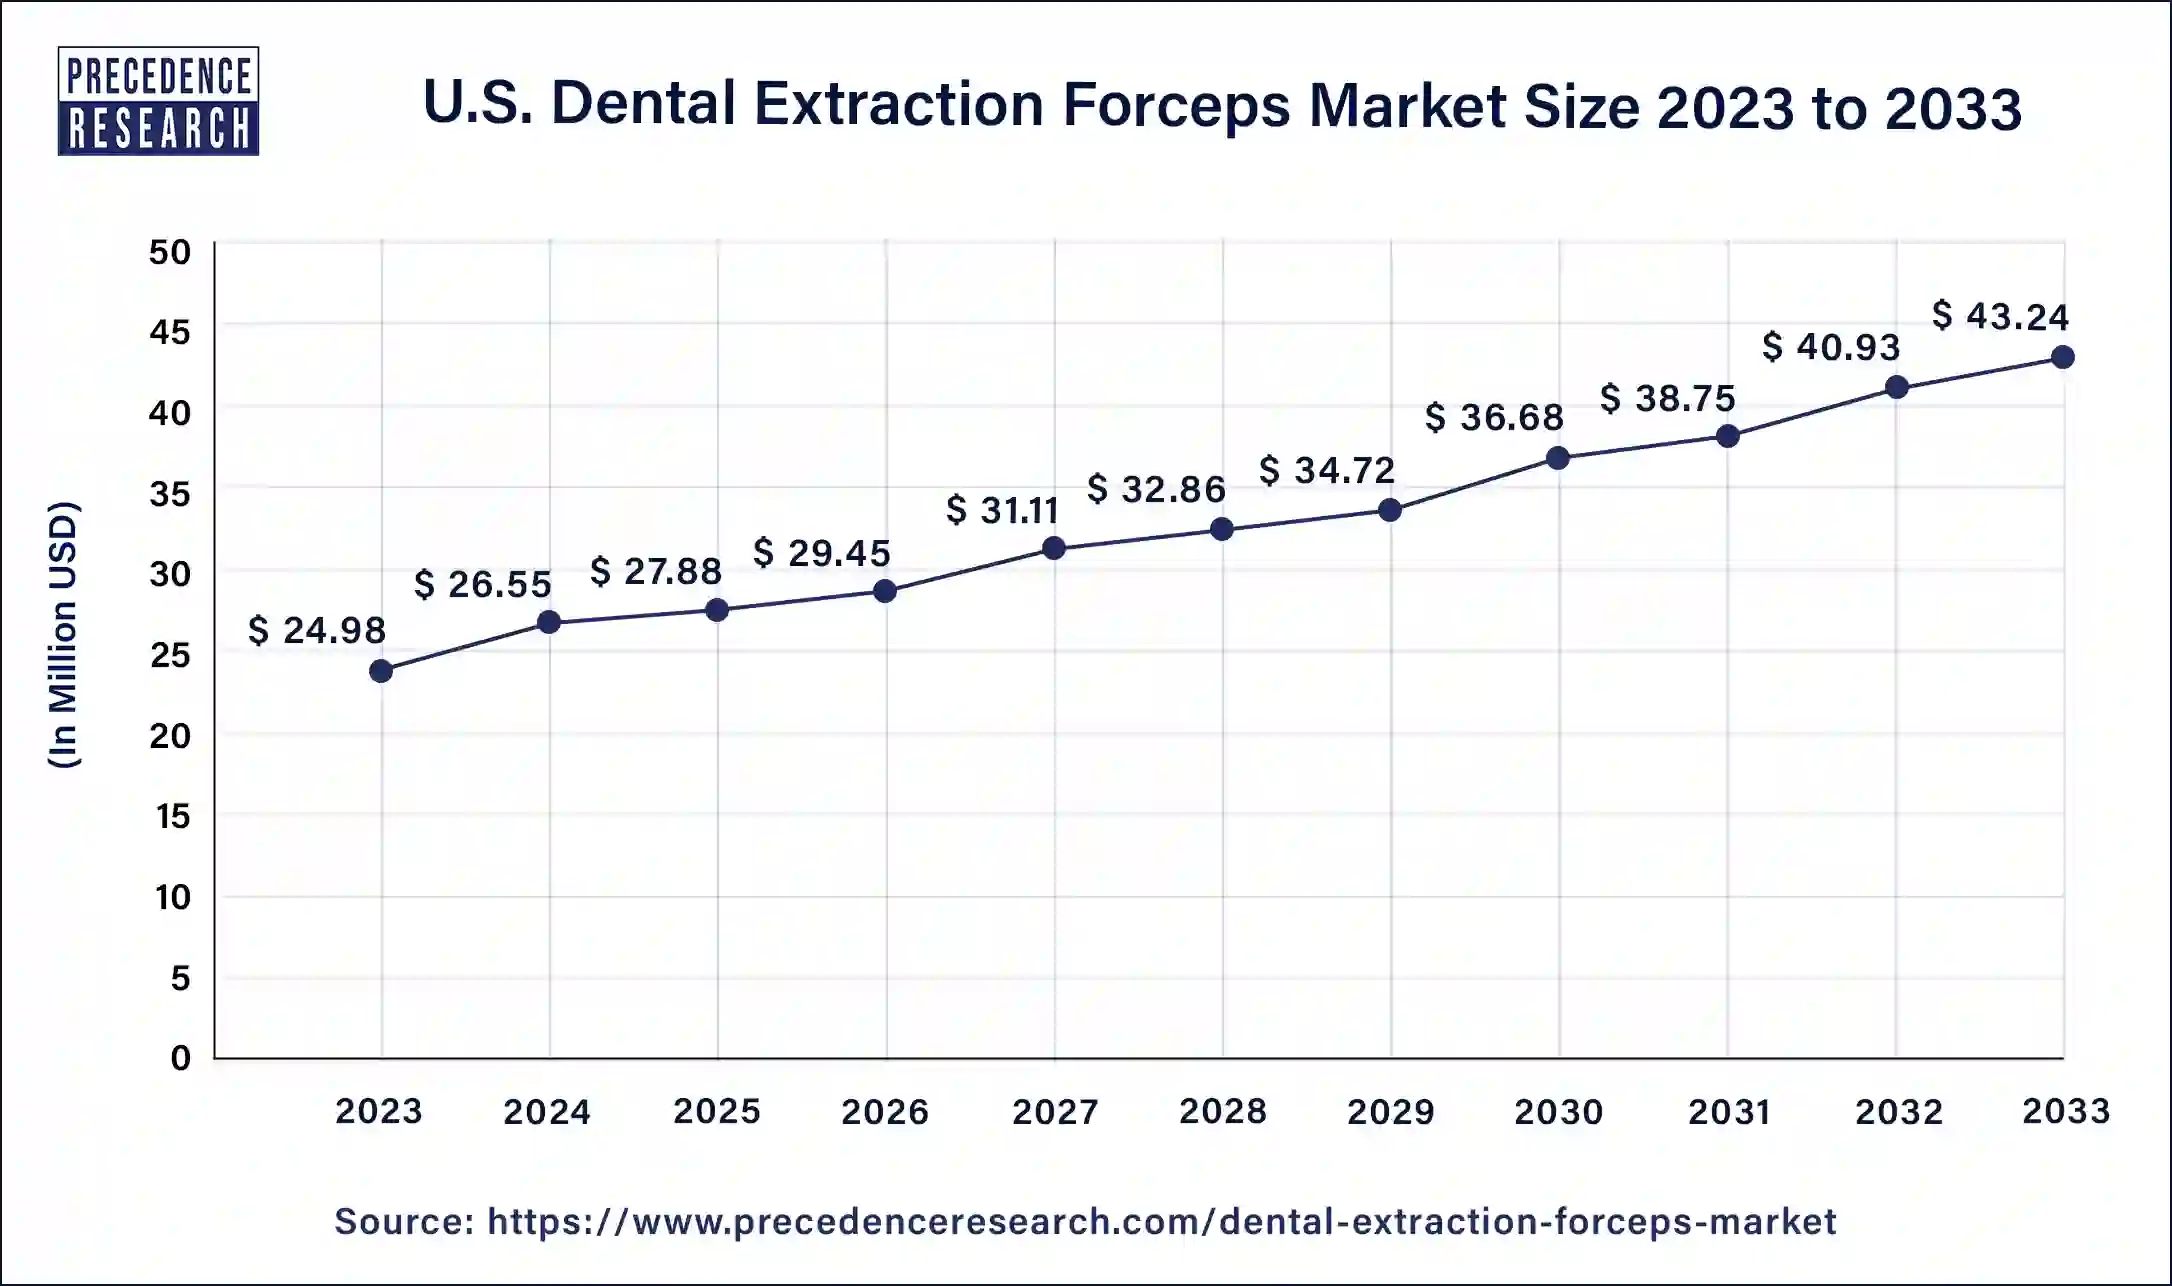 U.S. Dental Extraction Forceps Market Size 2024 to 2033